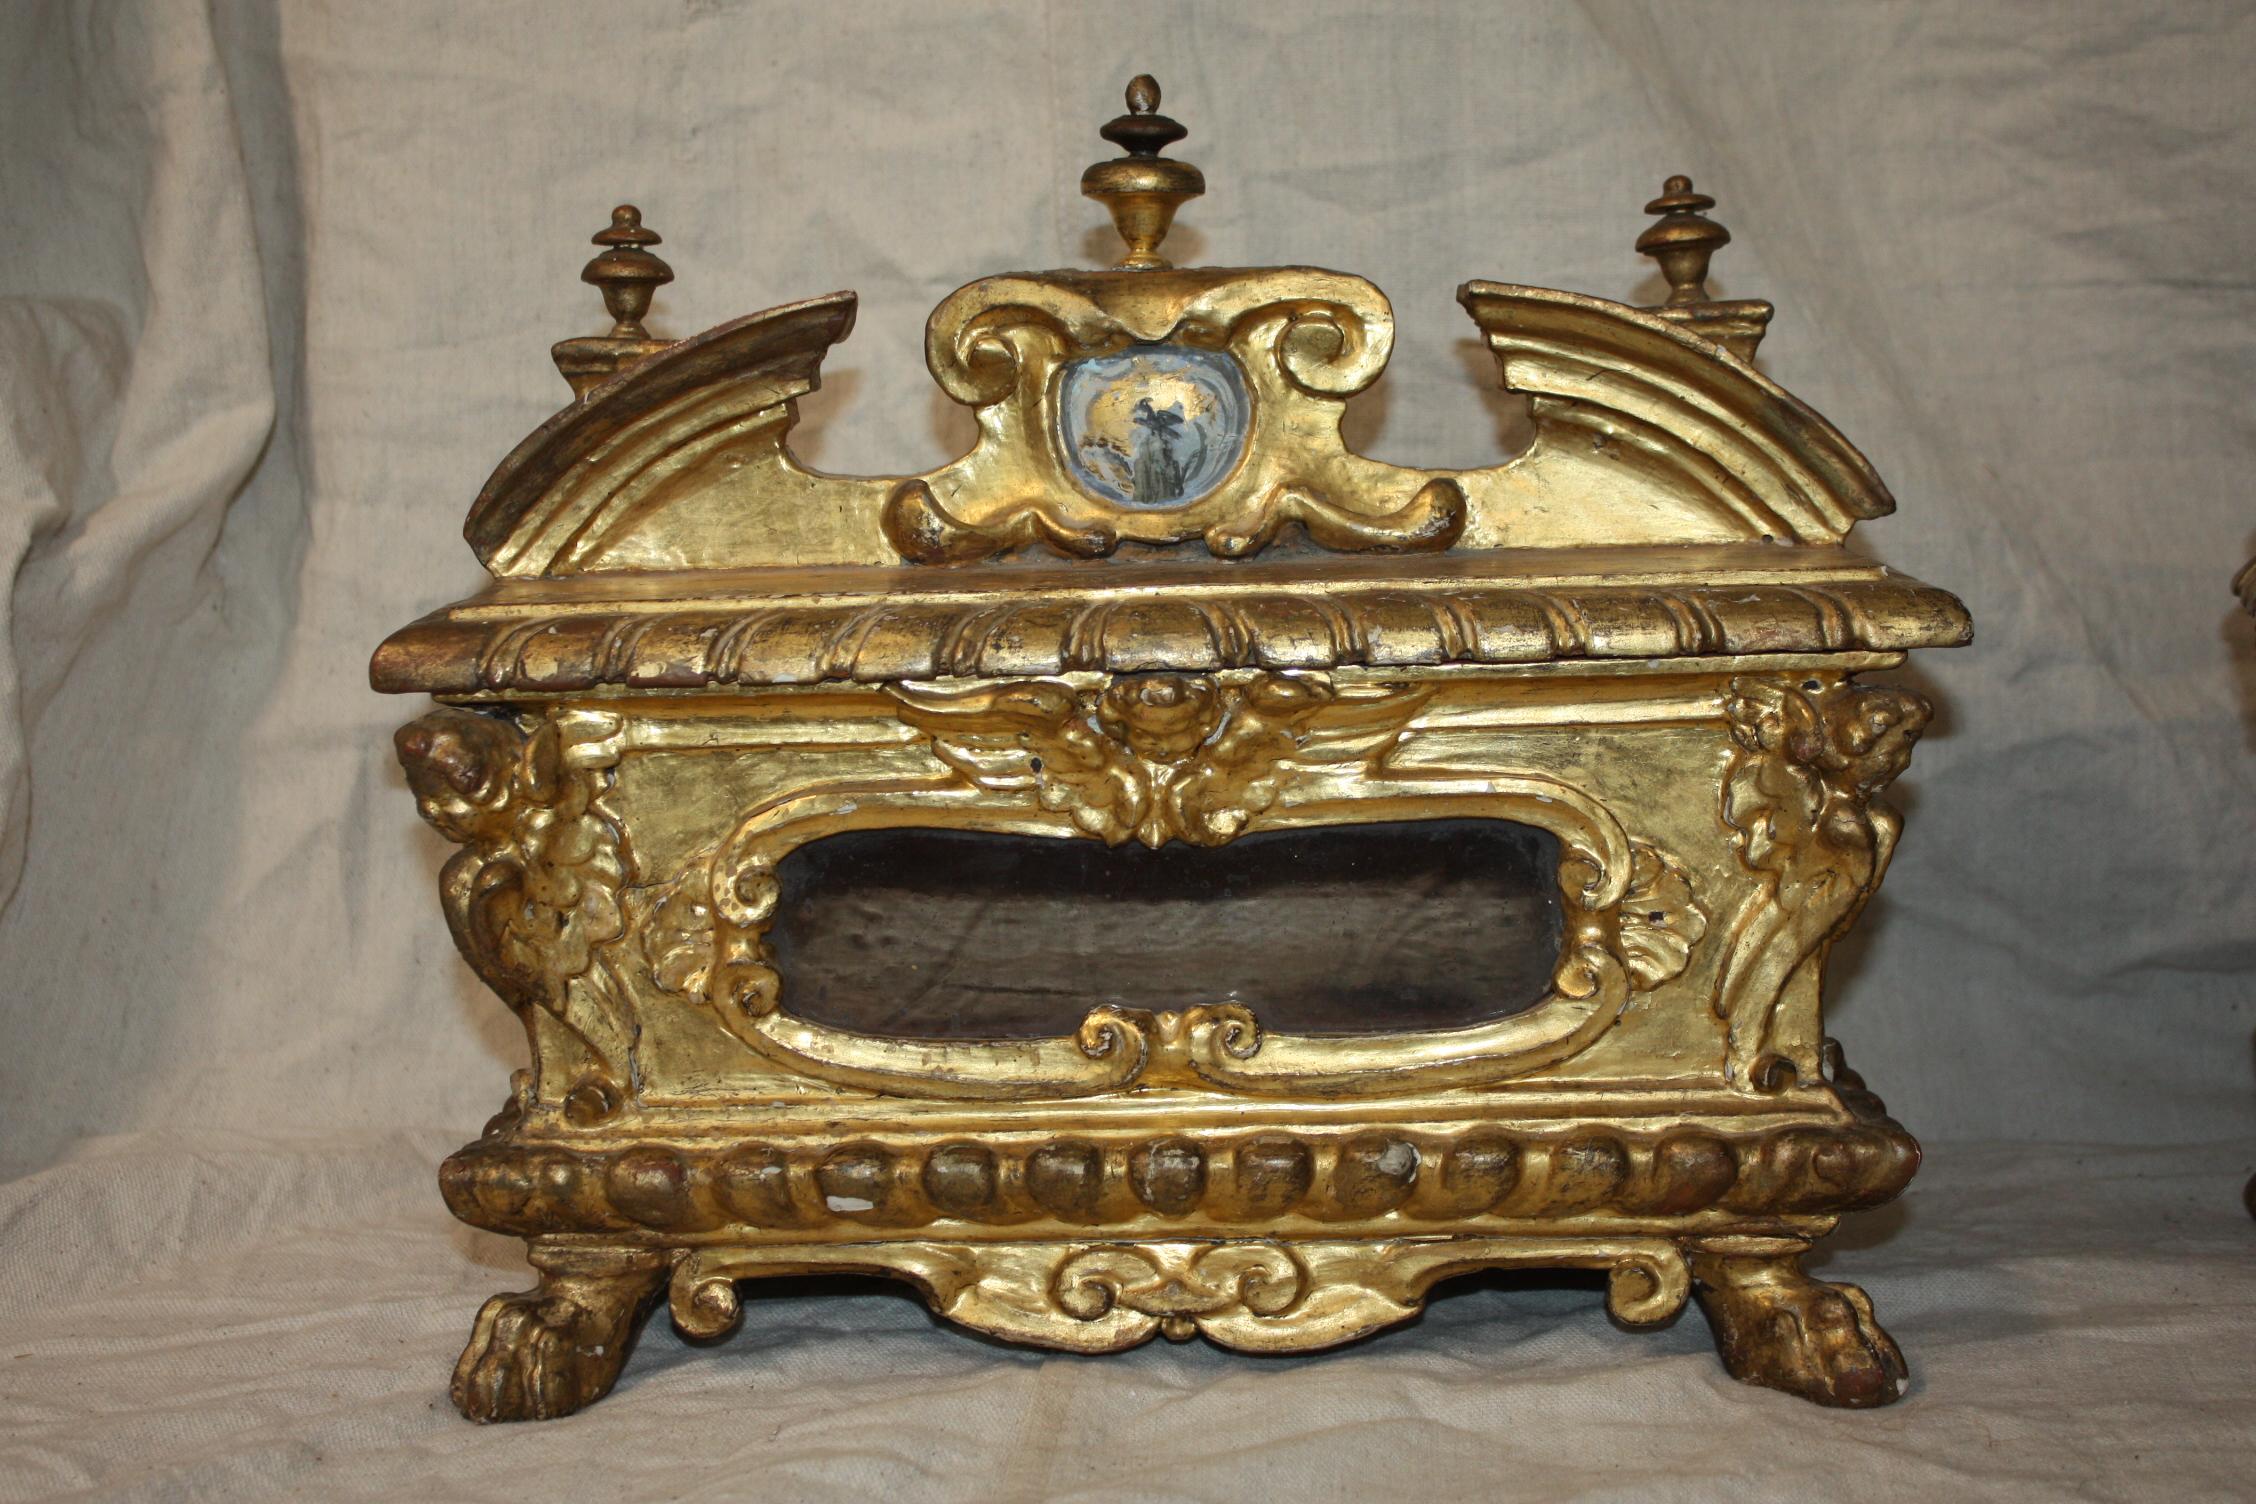 I recently purchased a pair of 18th century gold gilded Italian reliquaries. They are very attractive. All the glass is original with a wavy look. The backs have been replaced in more recent times which I believe is probably because originally they